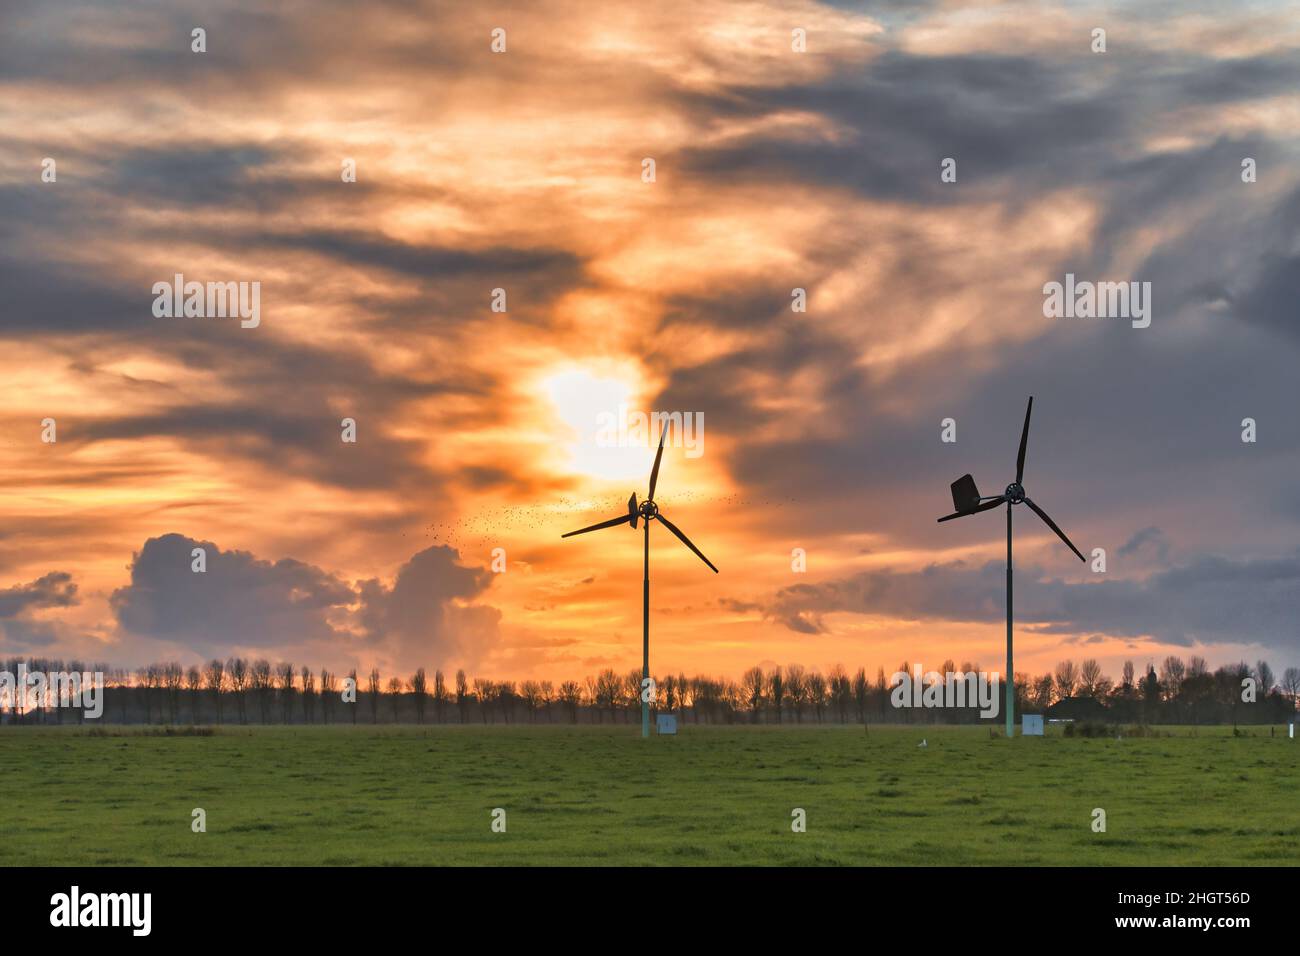 Two wind turbines in a pasture, in the flat agricultural Dutch province of Groningen, silhouetted against a dramatic sky at sunset. Stock Photo